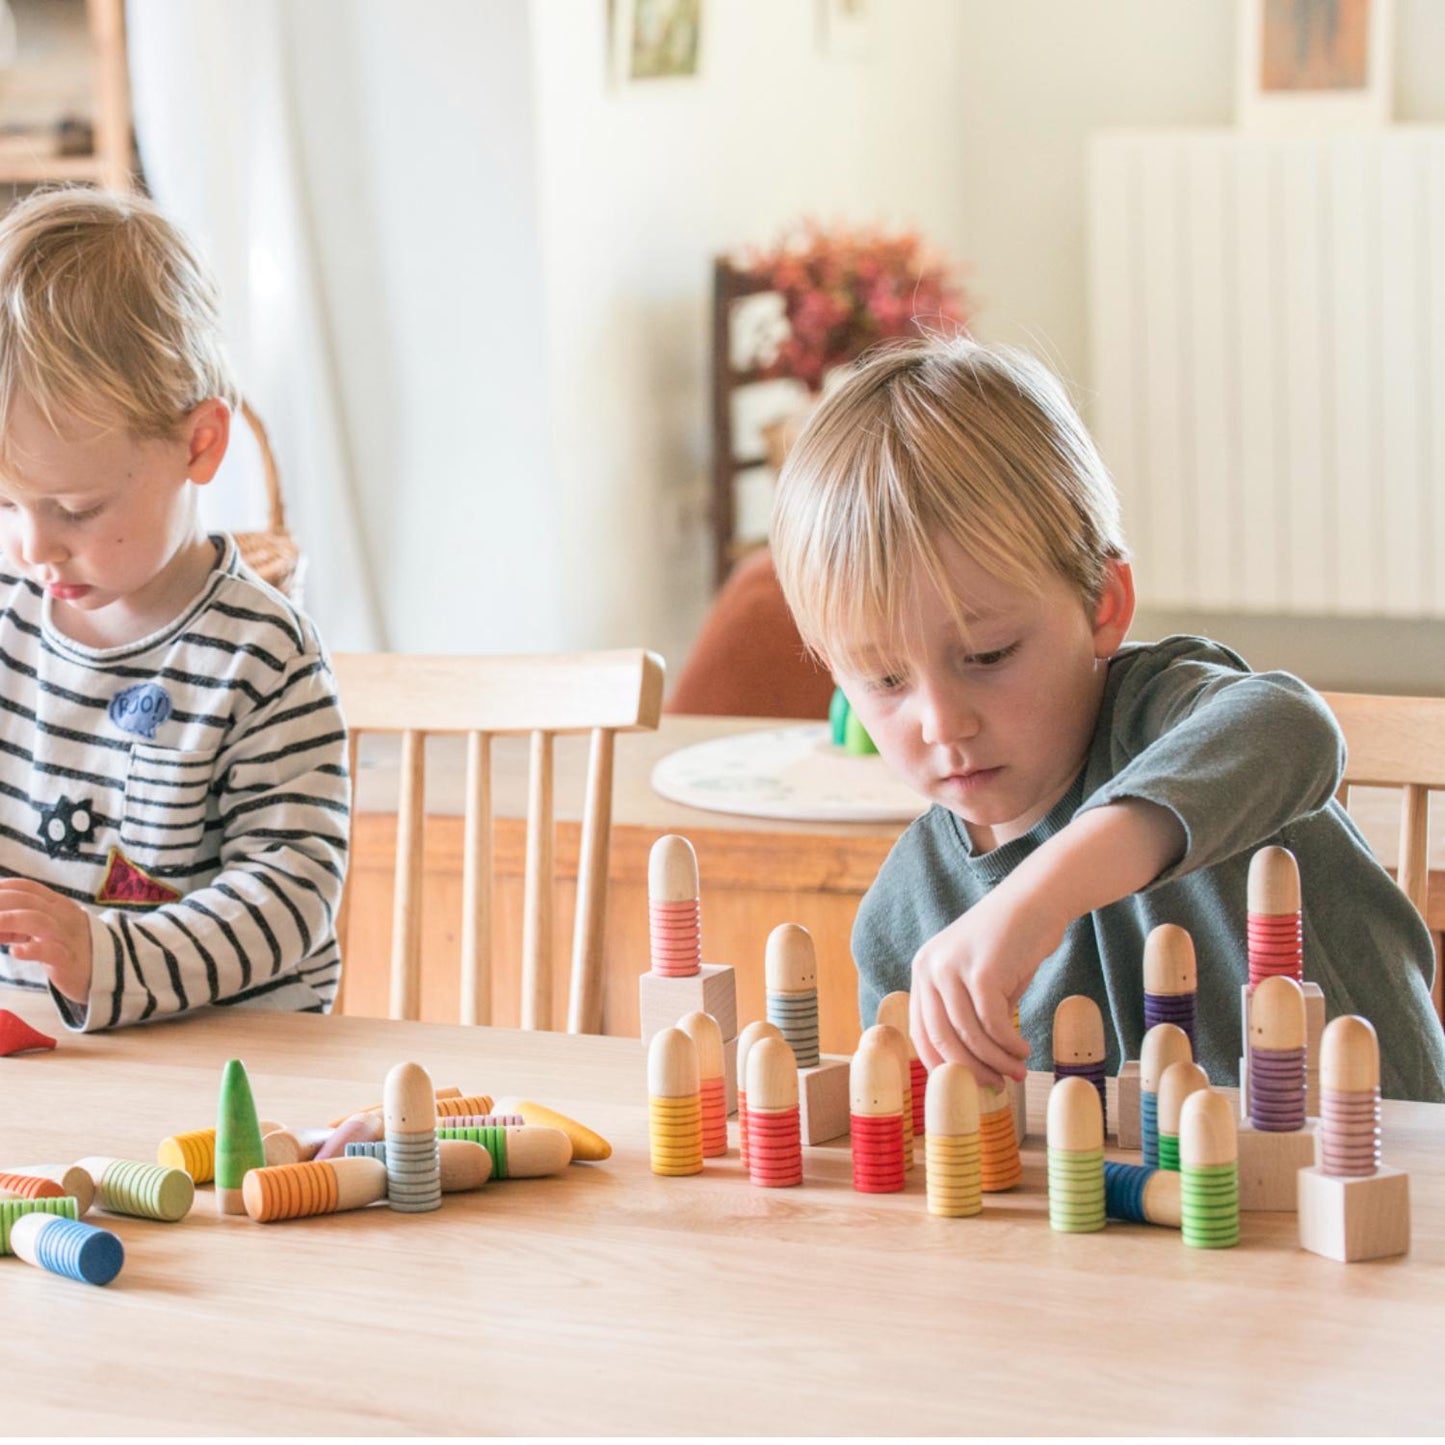 Grapat Brots | Wooden Toys for Kids | Open-Ended Play Set | Lifestyle: Boy Playing with Grapat Brots on Table | BeoVERDE.ie